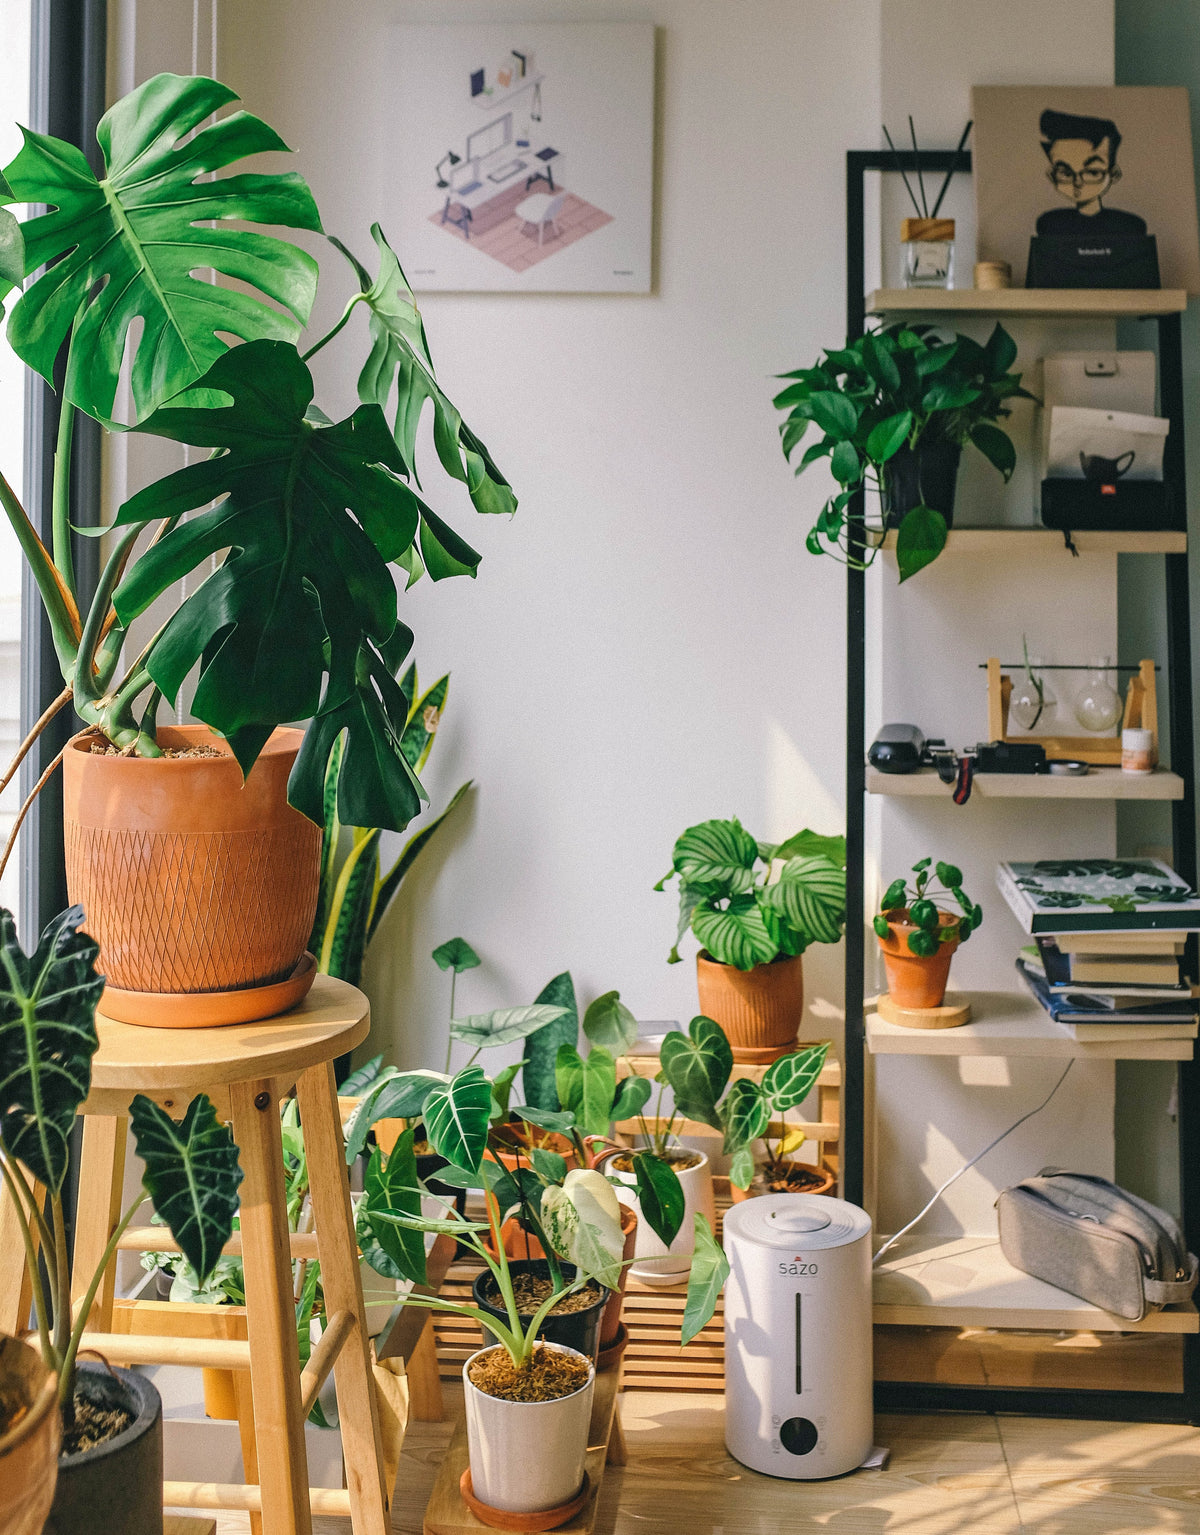 5 Houseplants to Help Purify the Air in Your Home